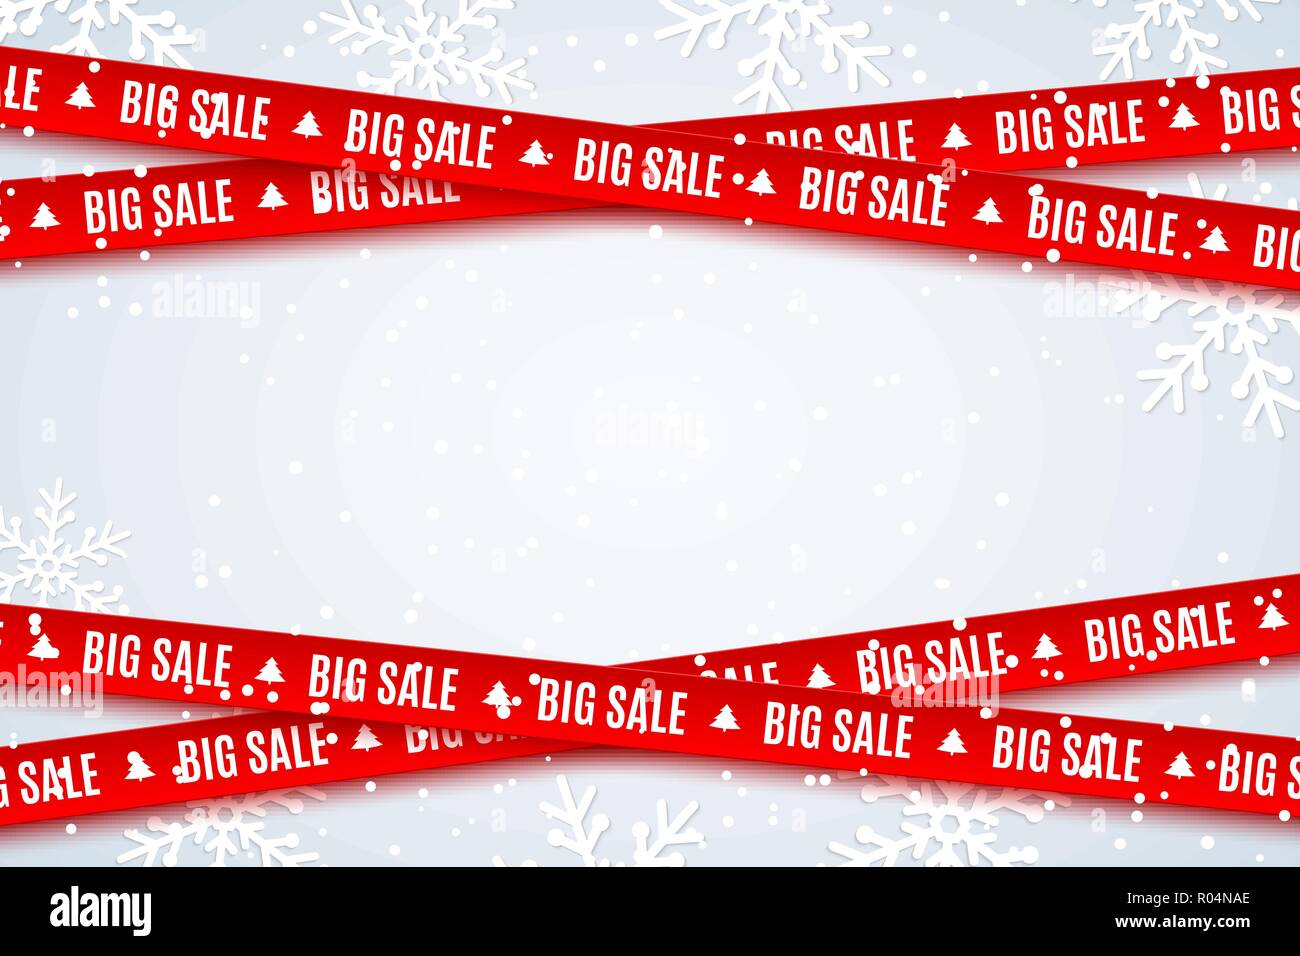 Red ribbons for Christmas sale on light blue background. Fallin snowflakes. Big sale. Graphic elements. Vector illustration. EPS 10 Stock Vector